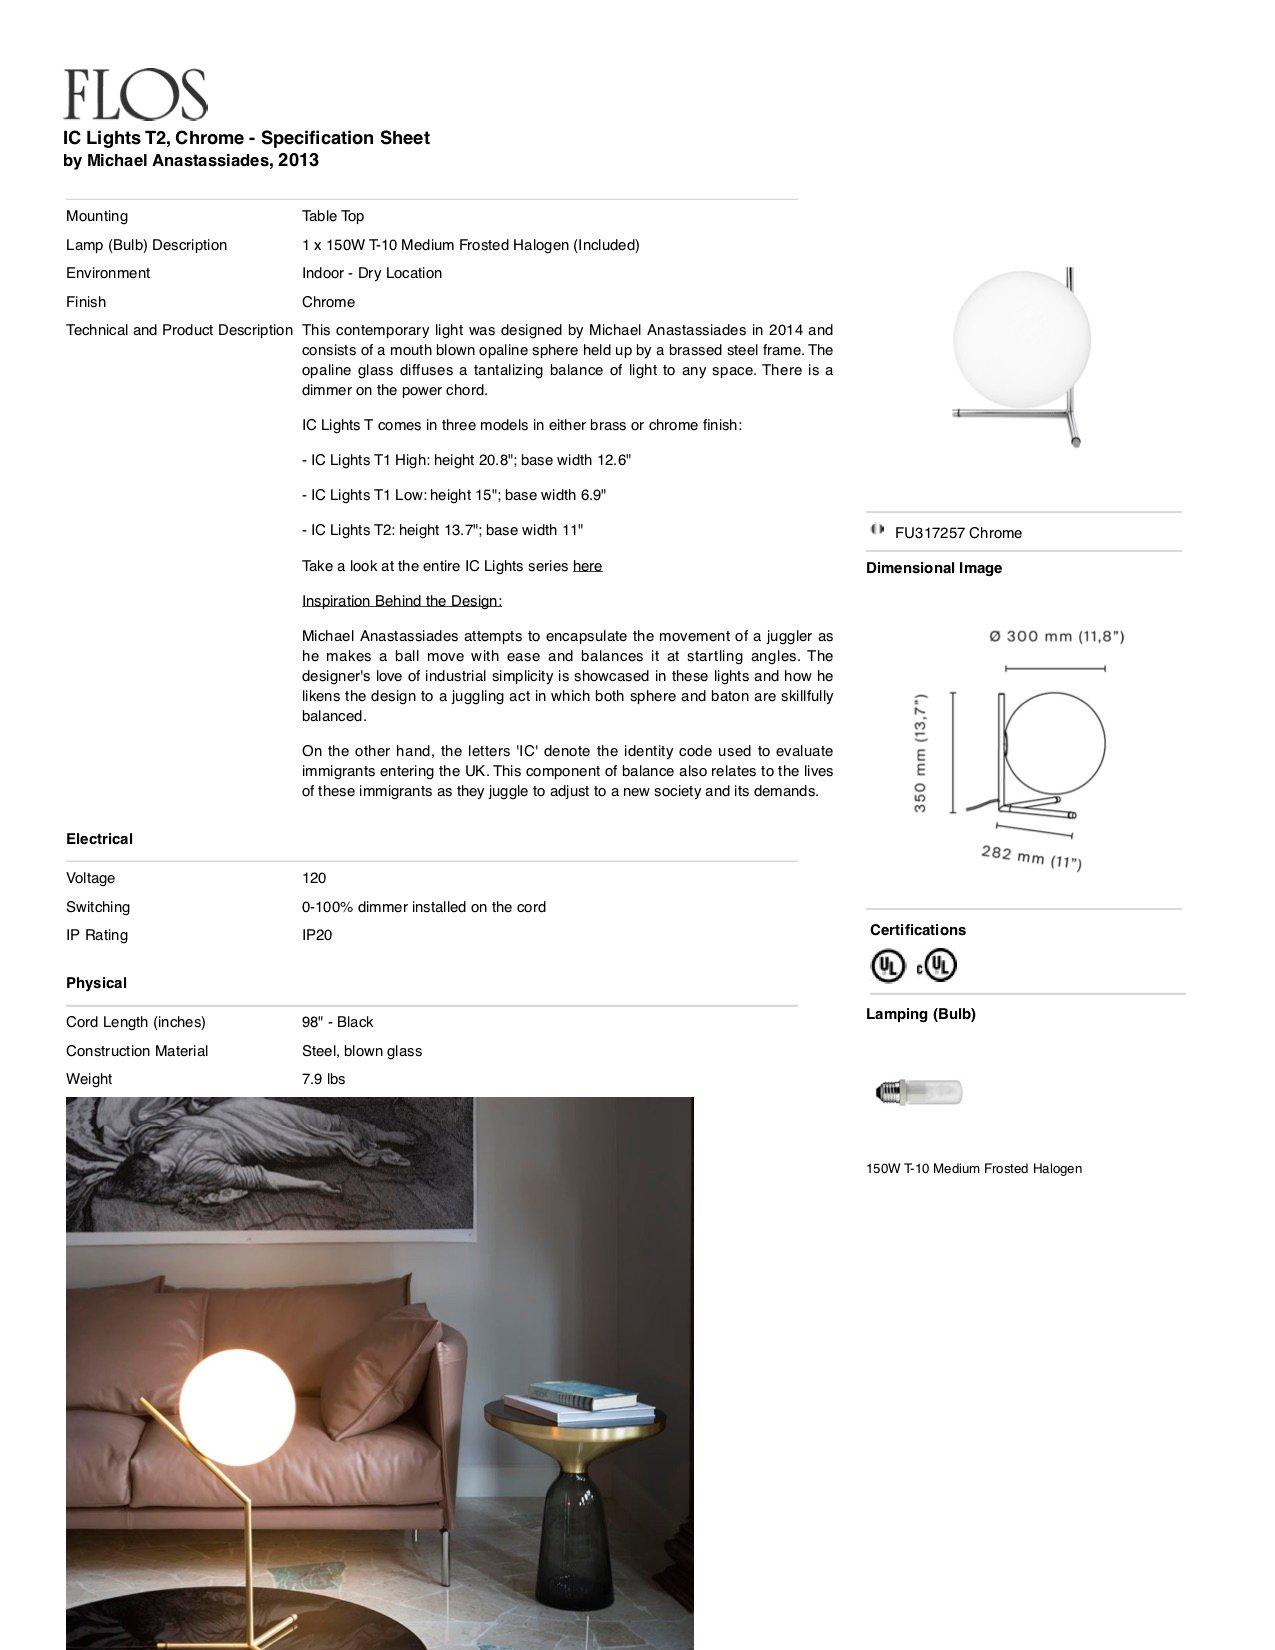 Michael Anastassiades Modern Minimalist Chrome & Glass Table Desk Lamp for FLOS In New Condition For Sale In Brooklyn, NY